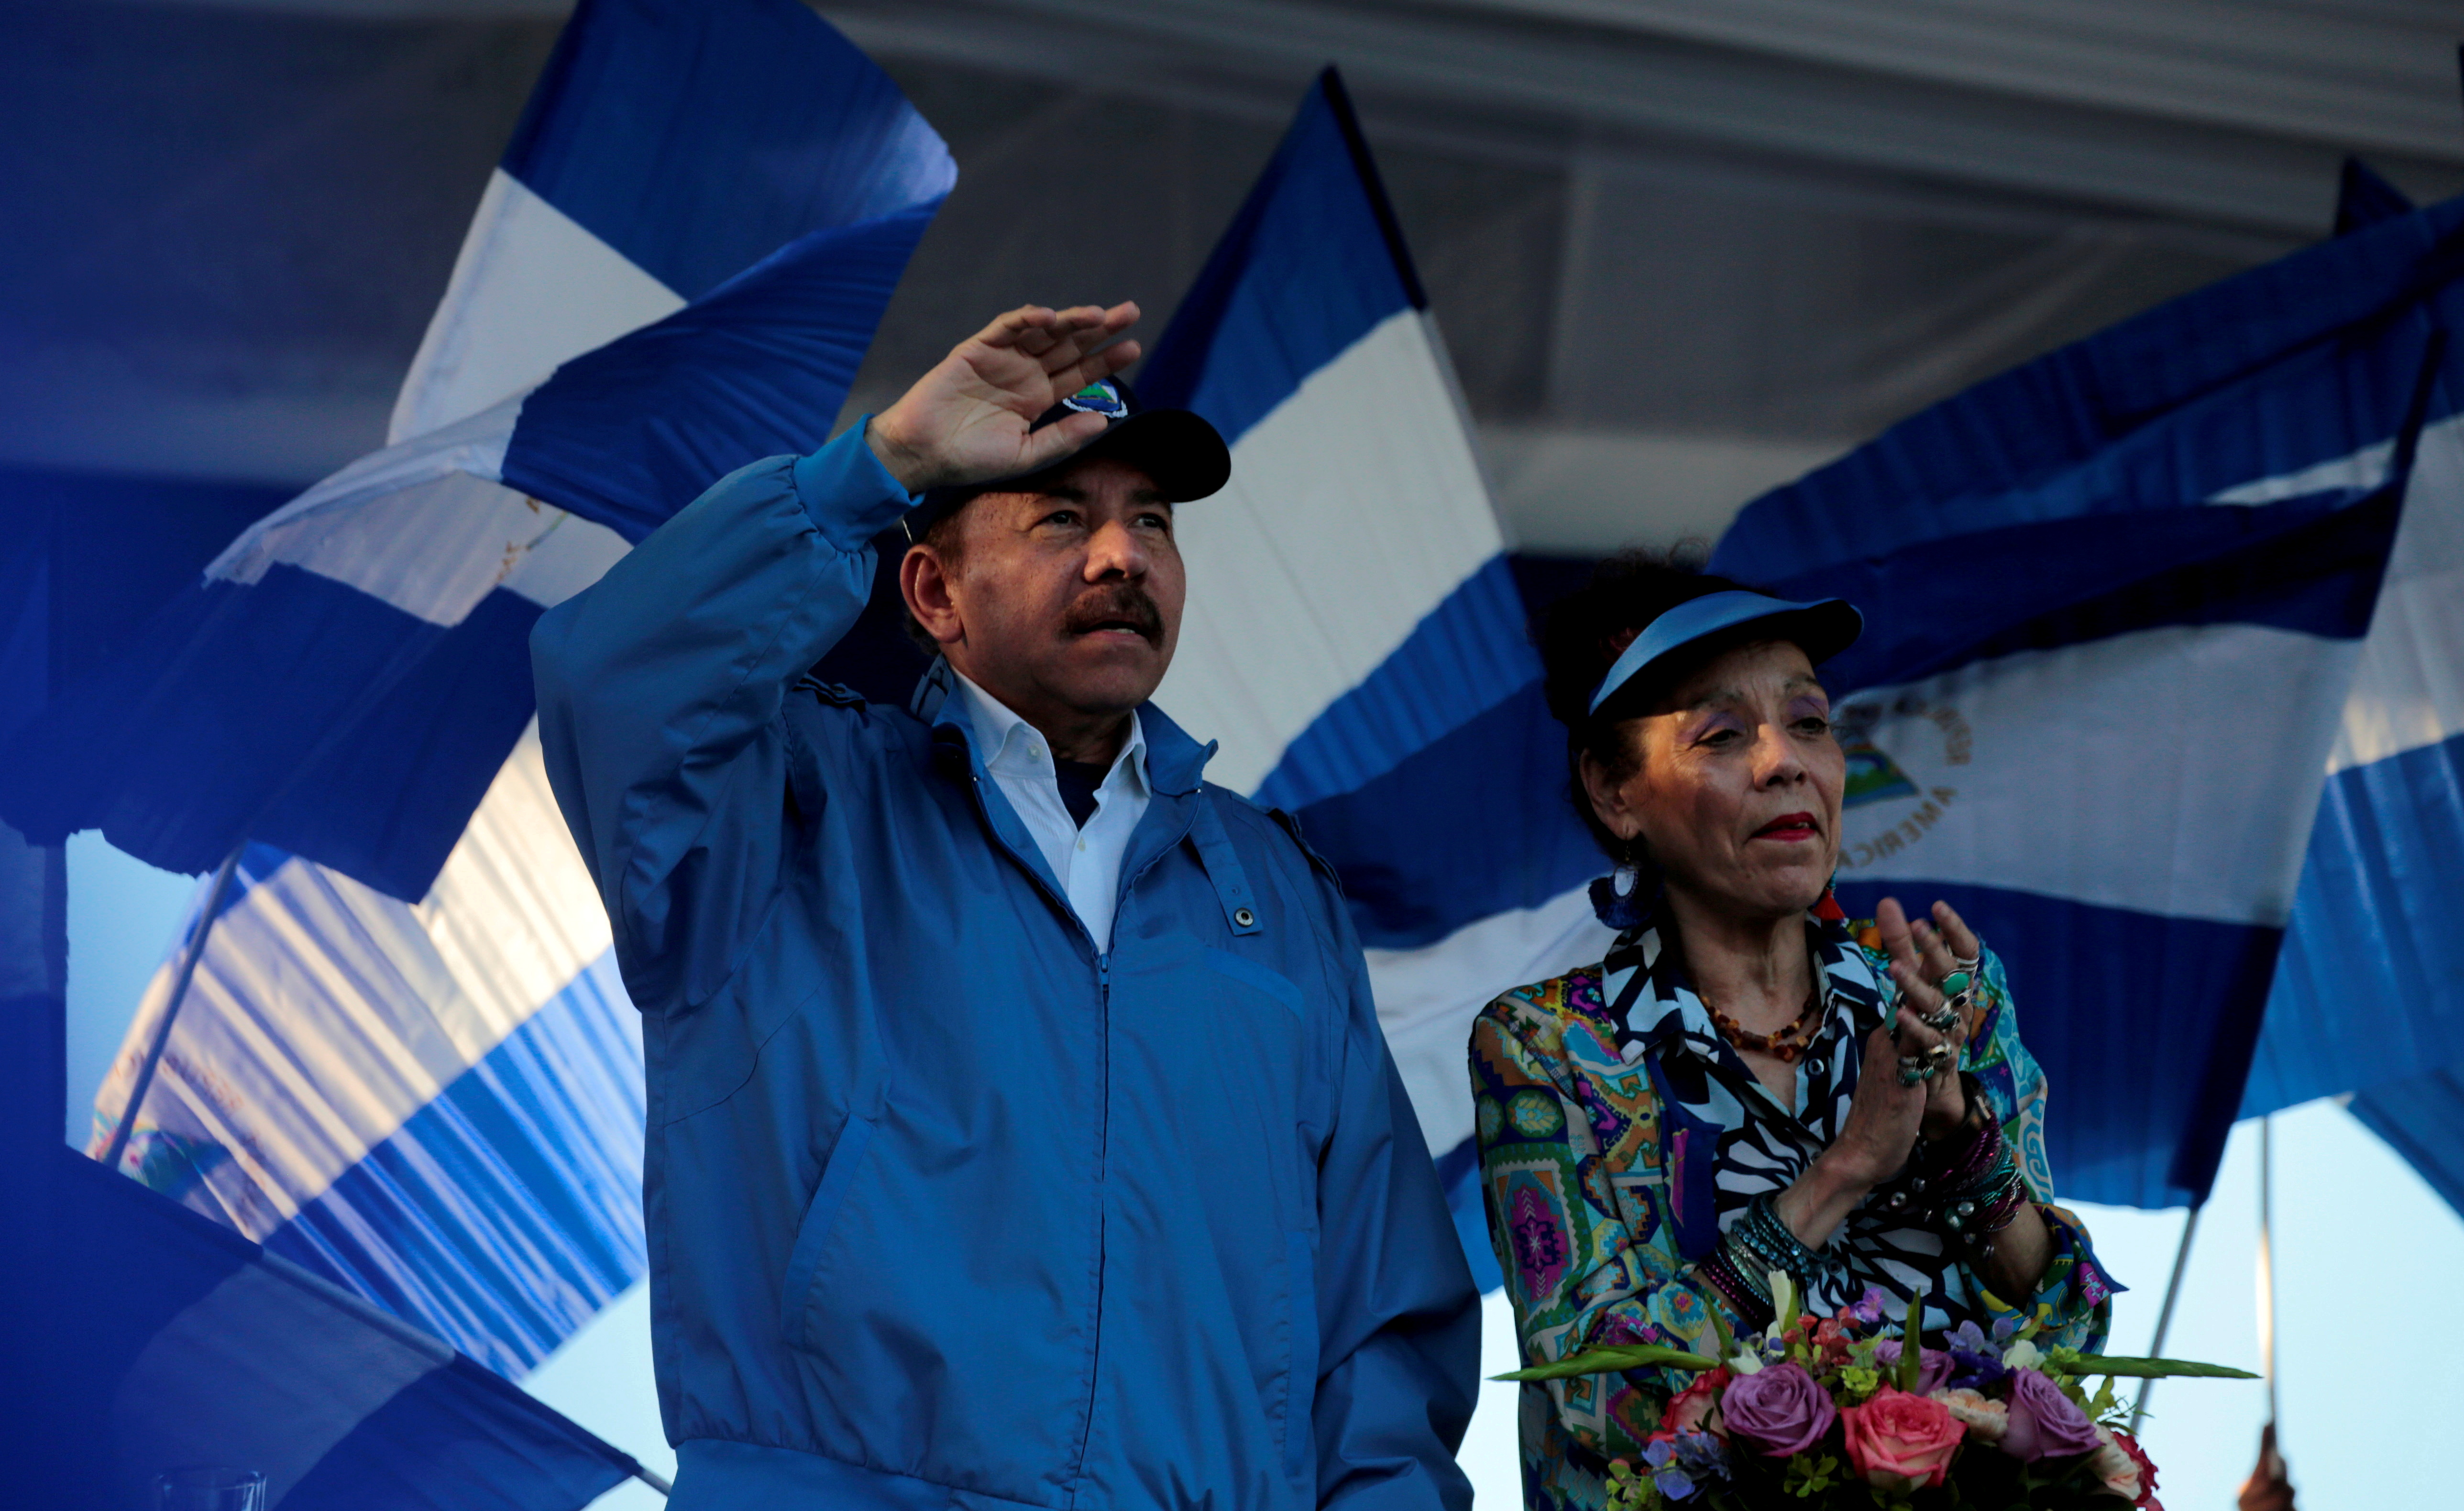 Nicaraguan President Ortega and Vice President Murillo gesture during a march in Managua